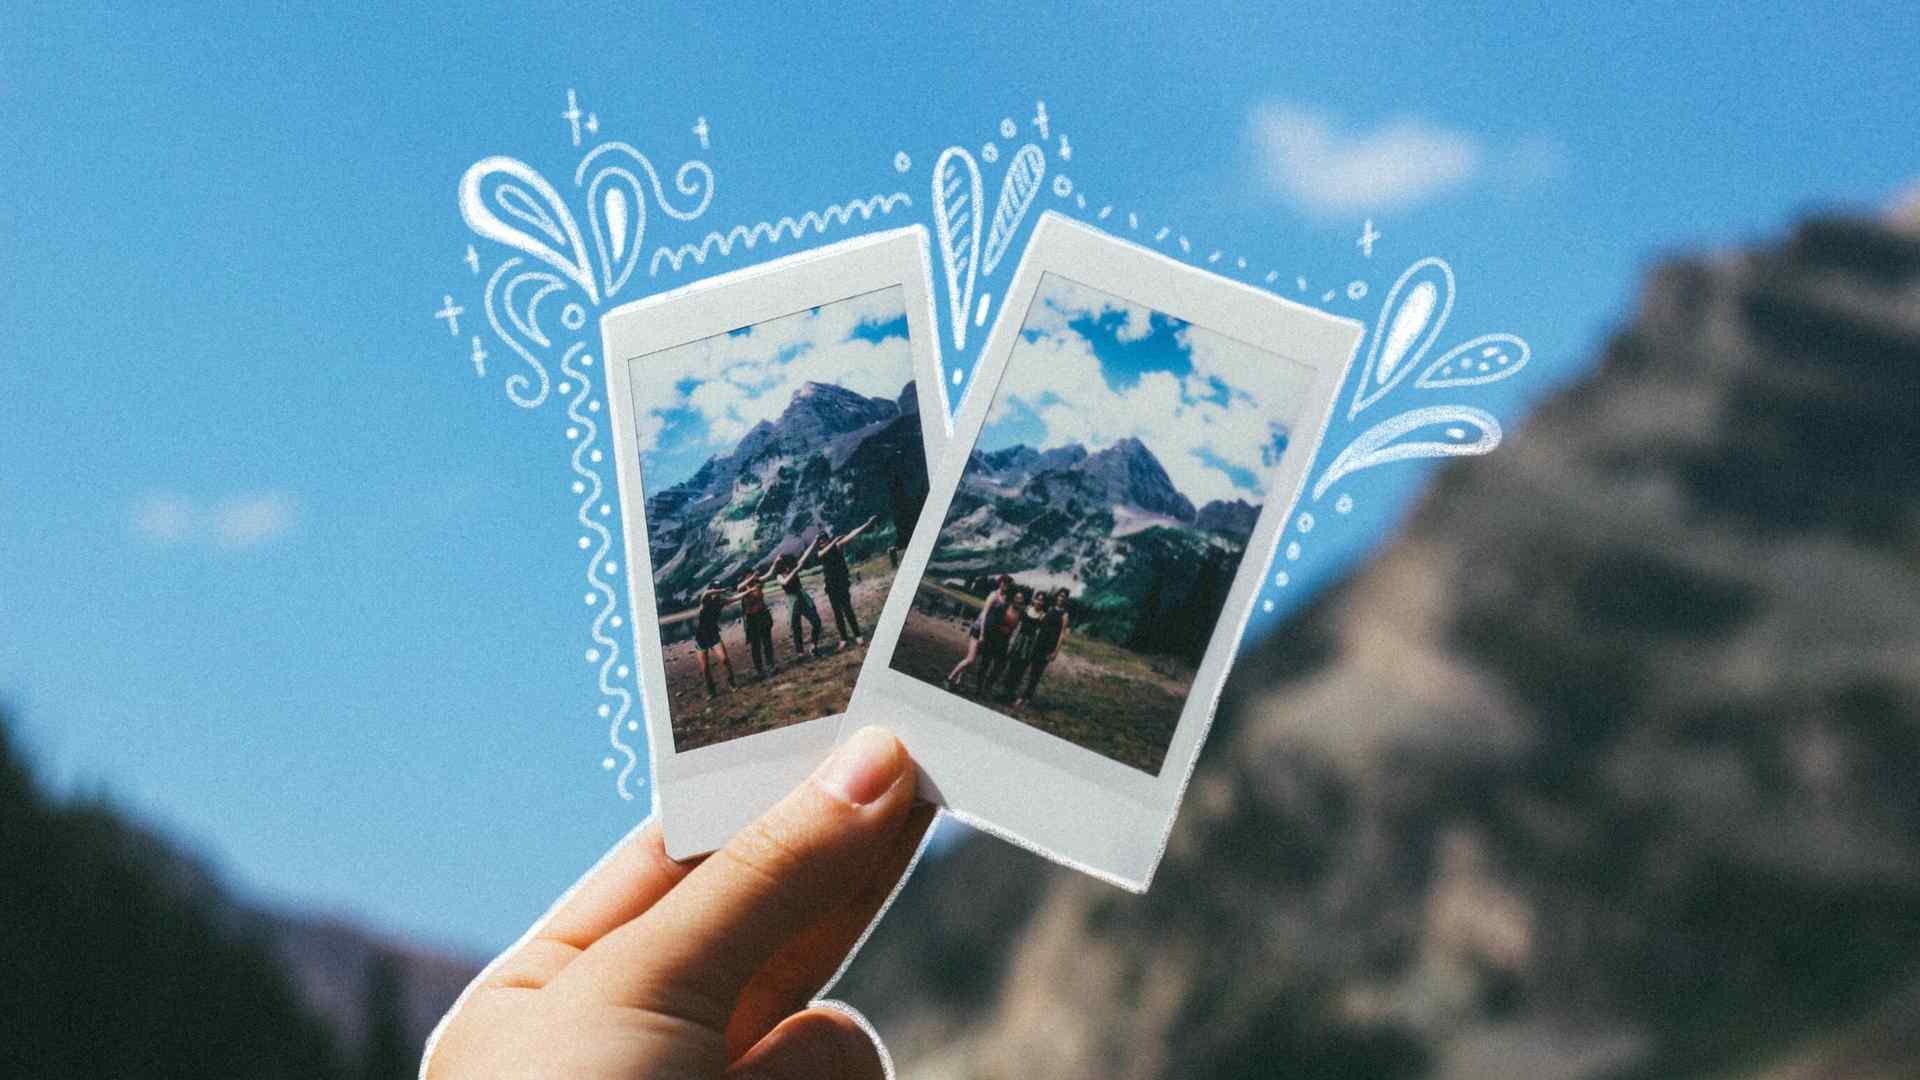 Mei holds two Polaroids of mountains in front of a mountain scene